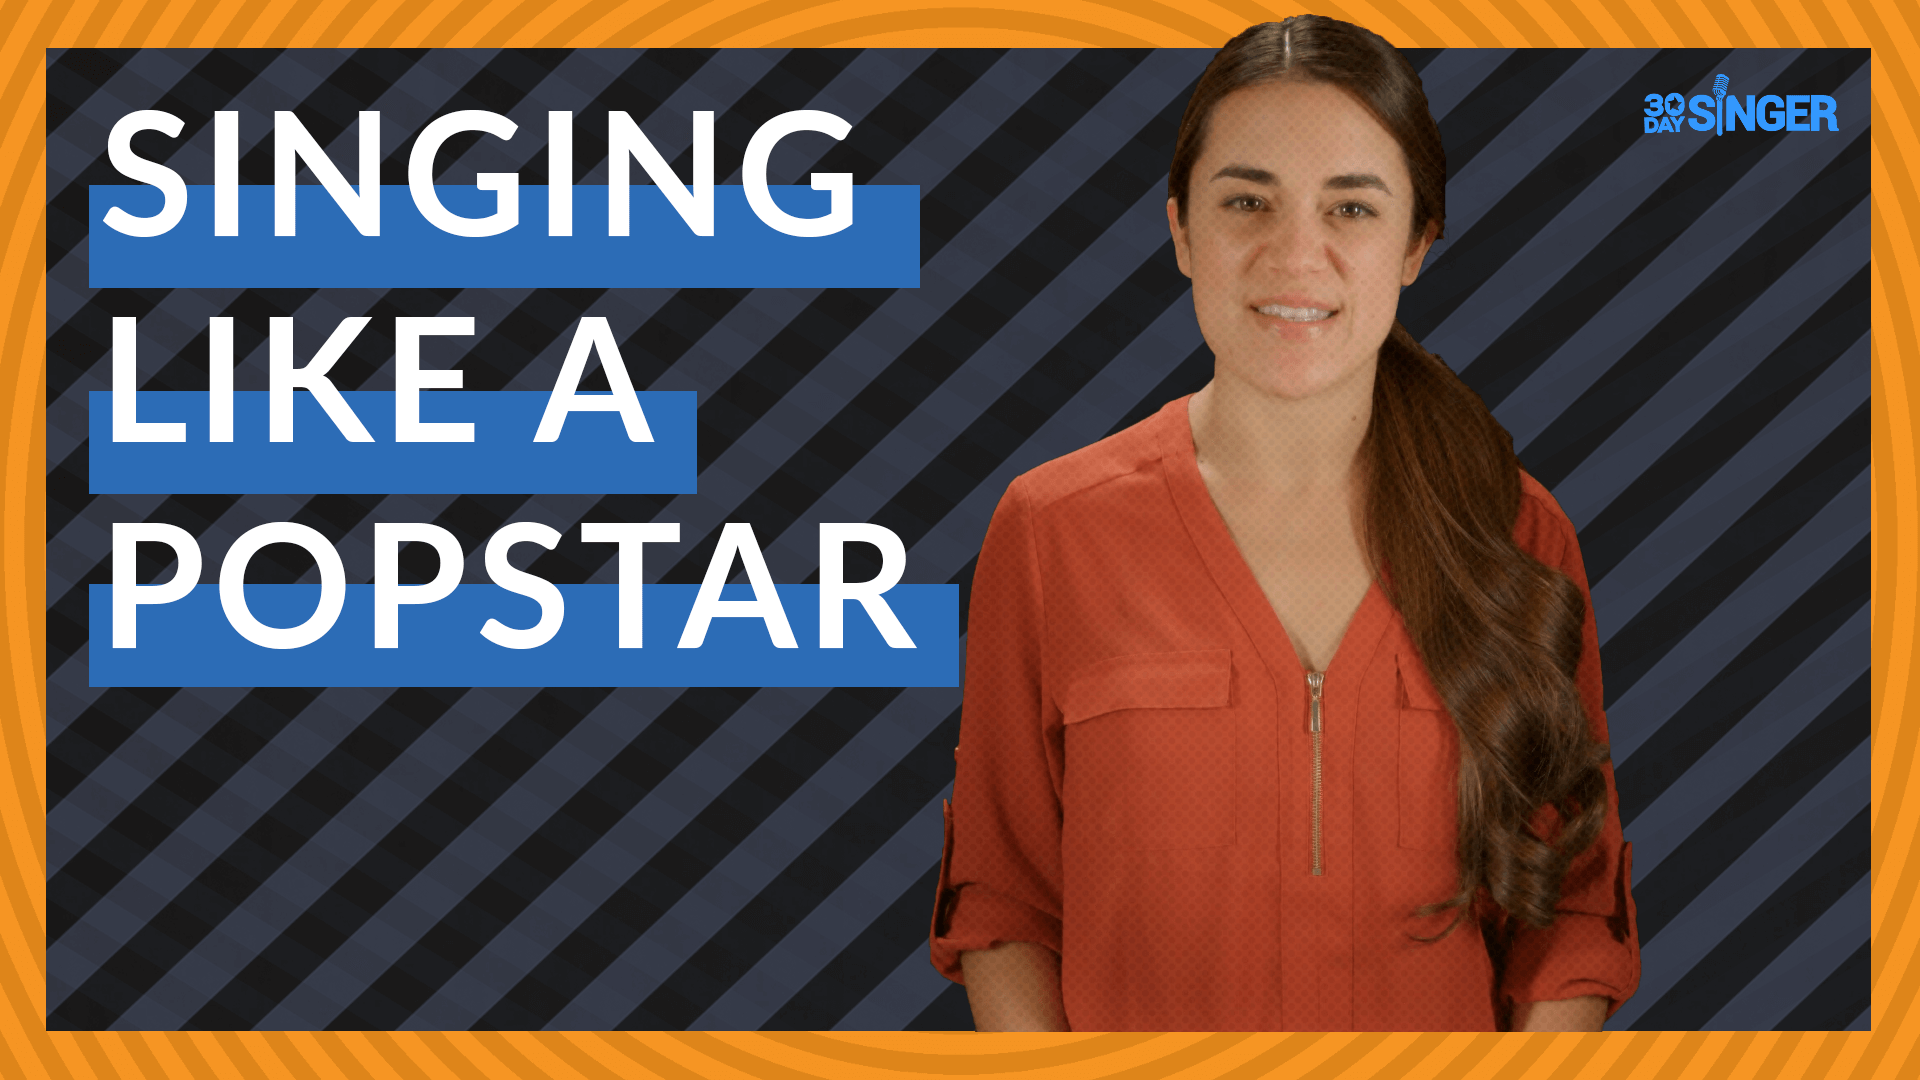 How To Sing Like a Pop Star